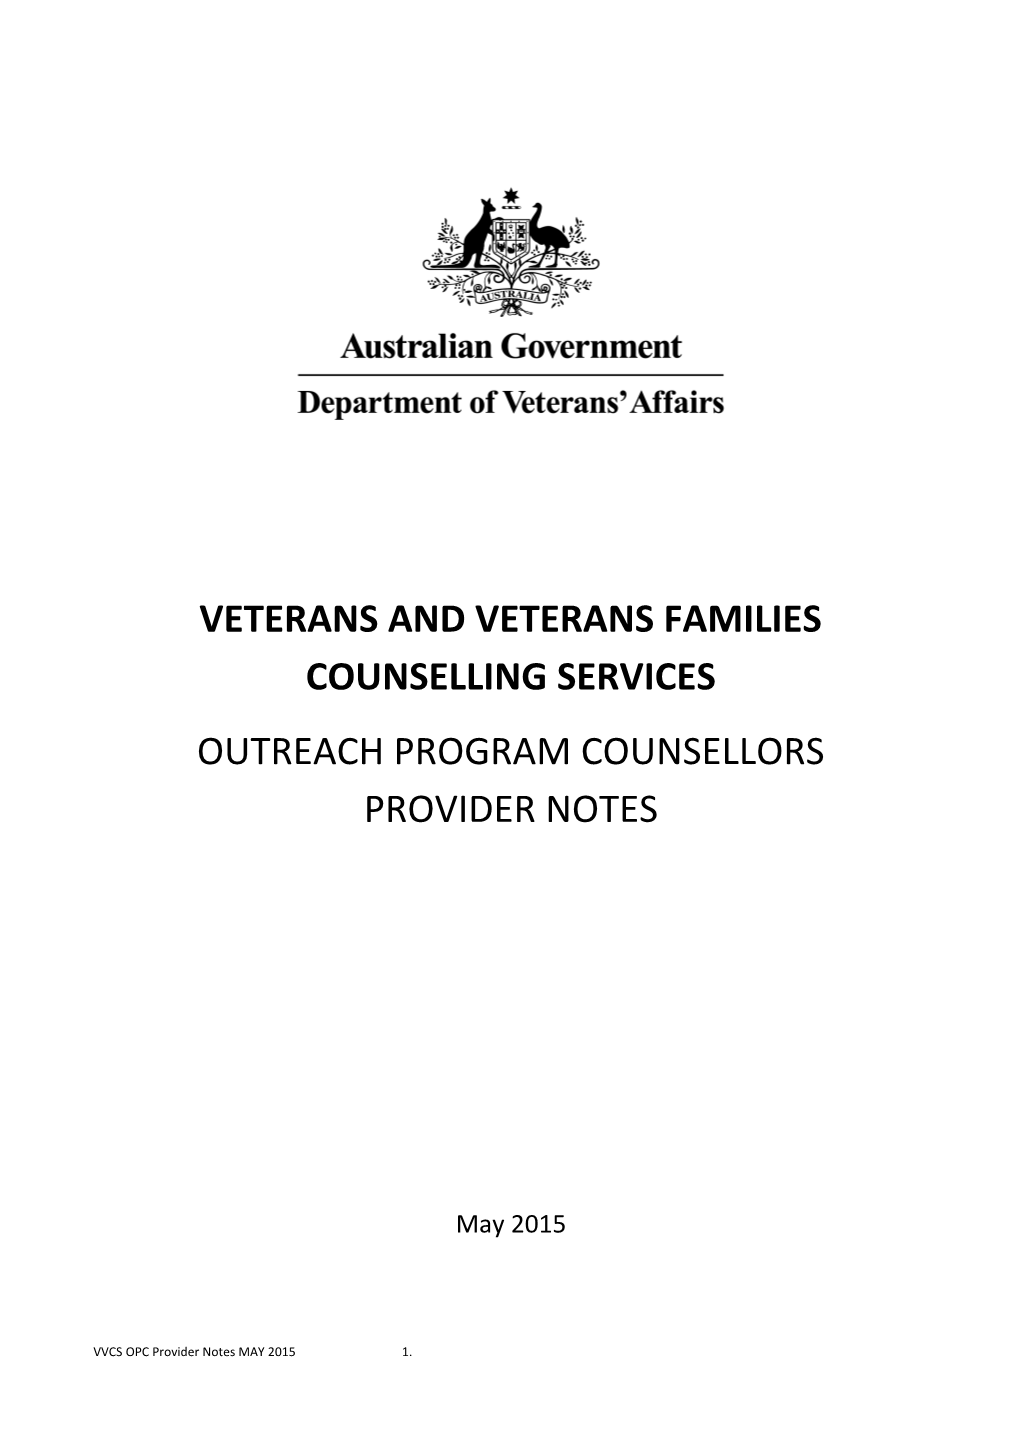 Veterans and Veterans Families Counselling Services